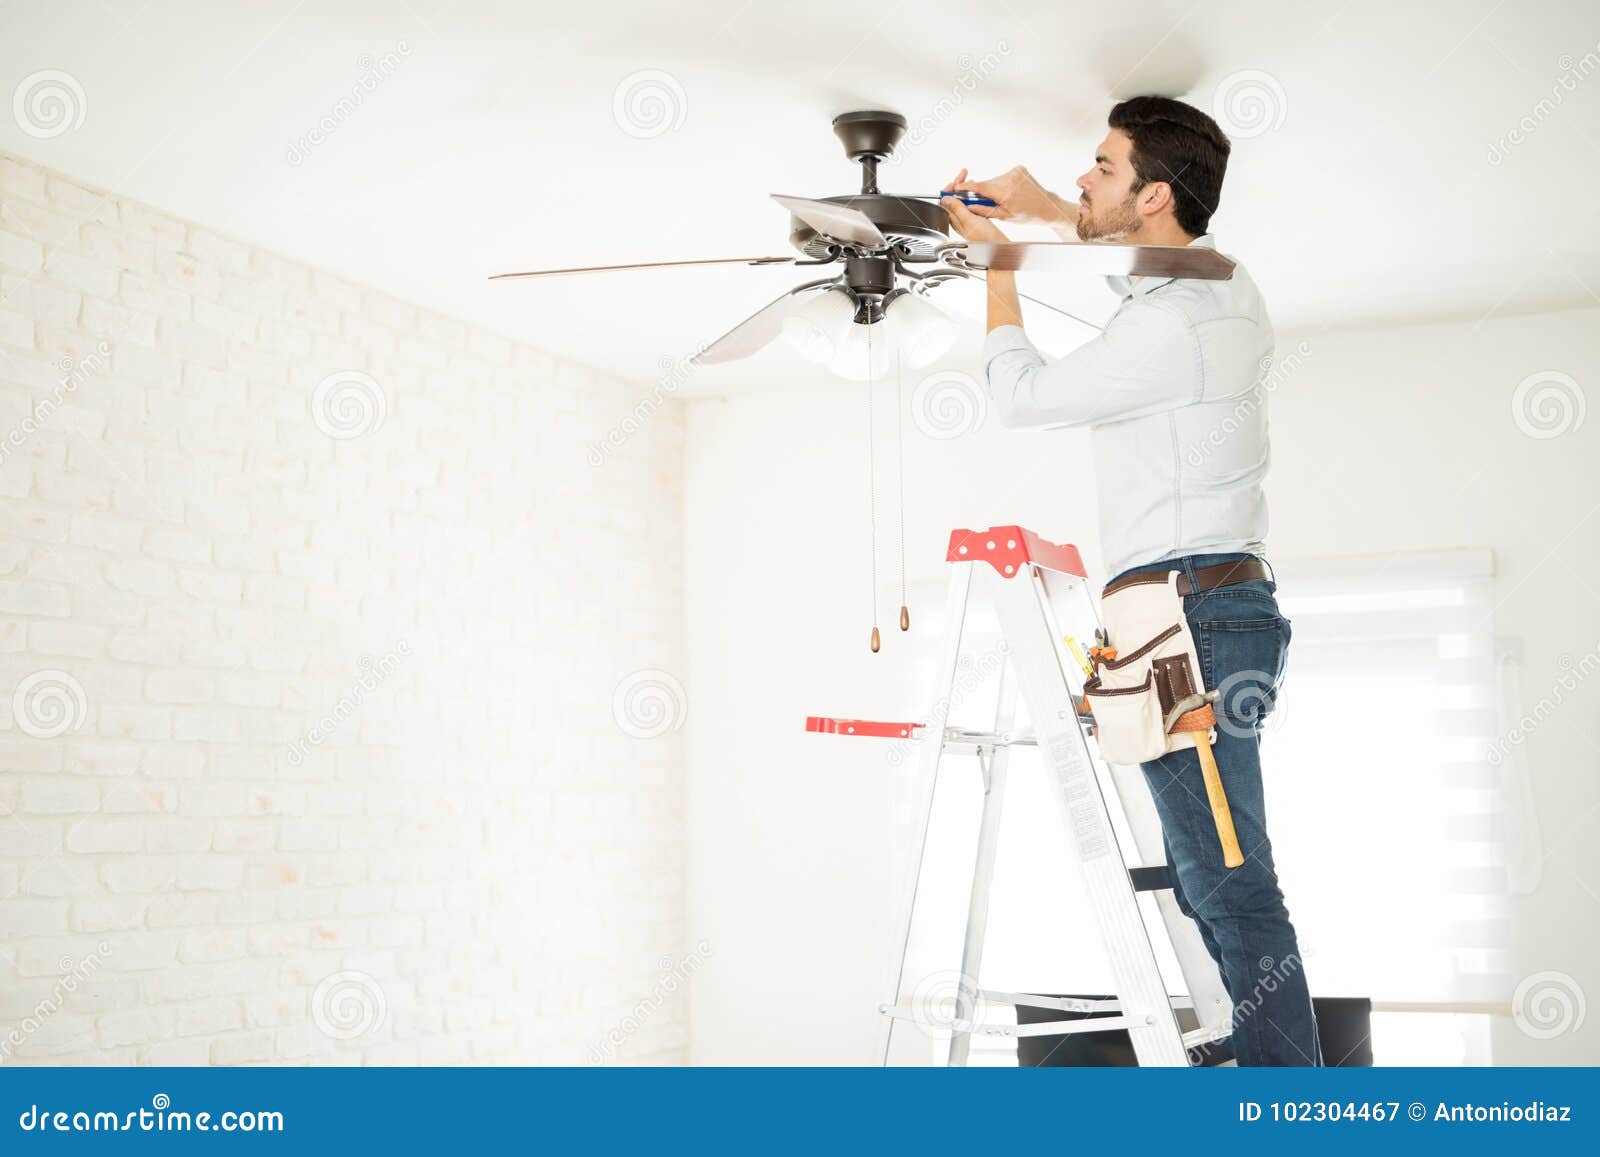 Electrician Fixing A Ceiling Fan Stock Image Image Of Handyman